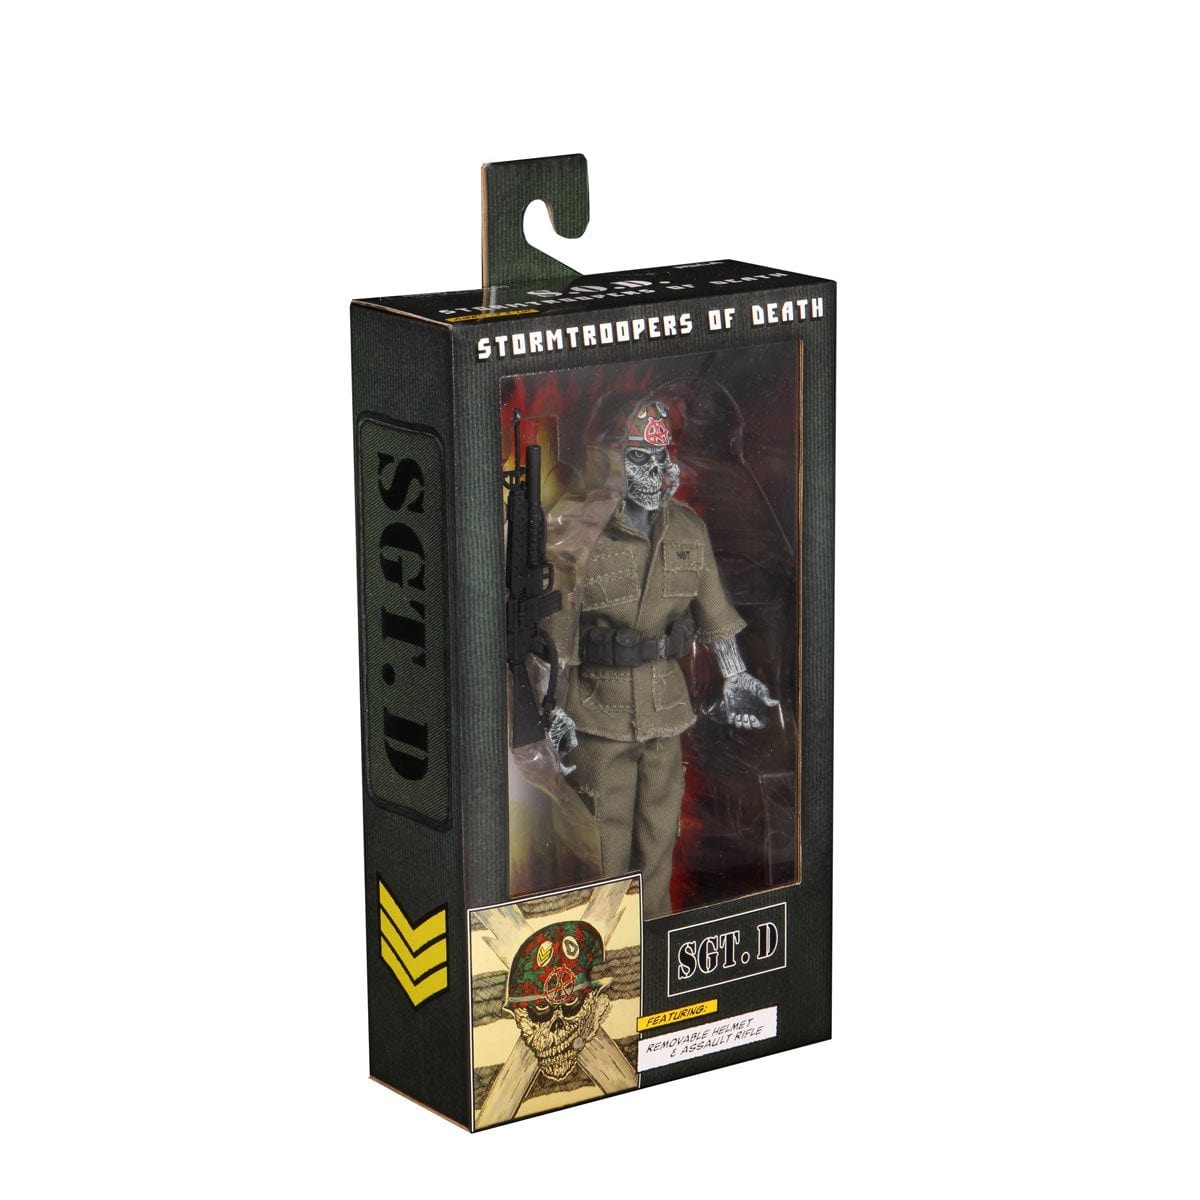 Neca: Stormtroopers of Death - Sgt. D - Third Eye